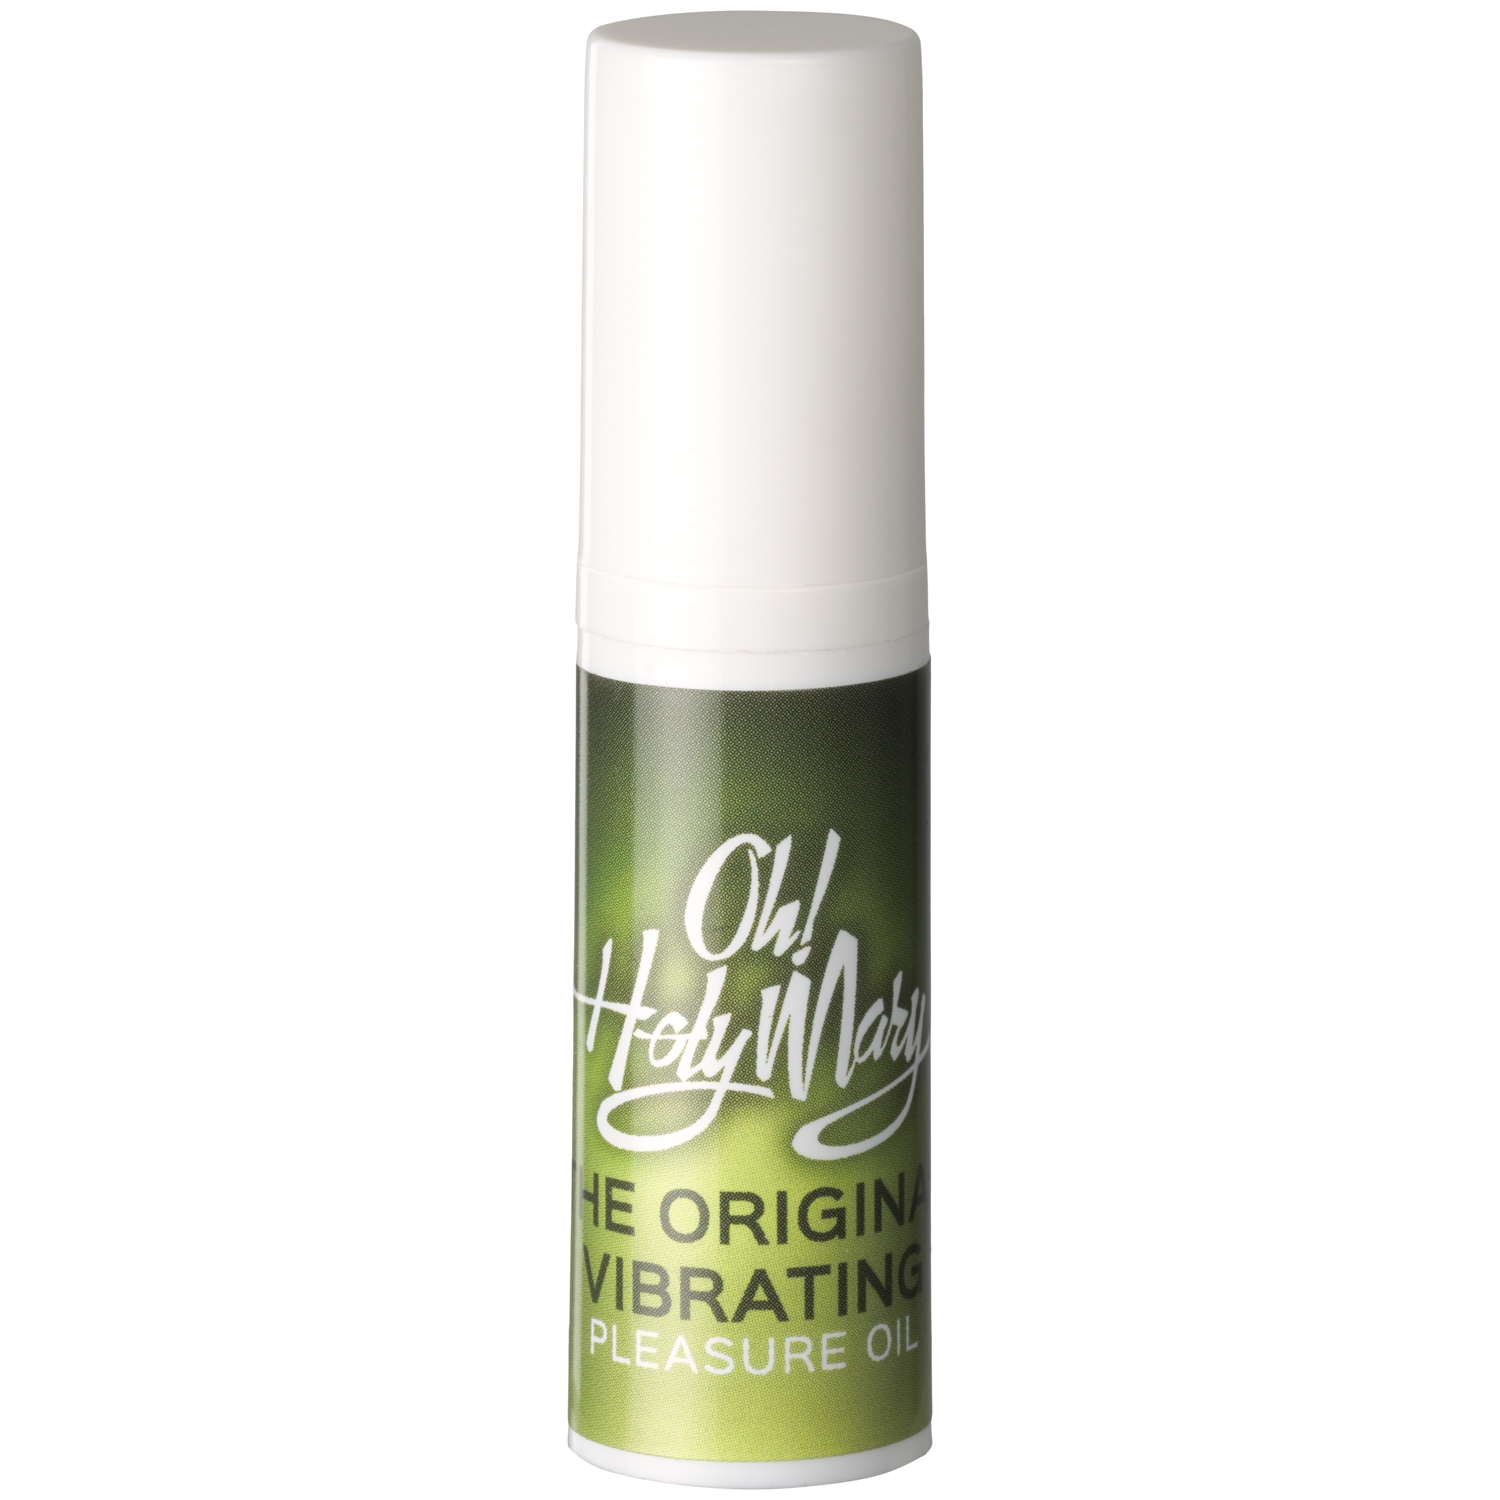 Oh! Holy Mary Original Vibrating Pleasure Oil 6 ml - Clear